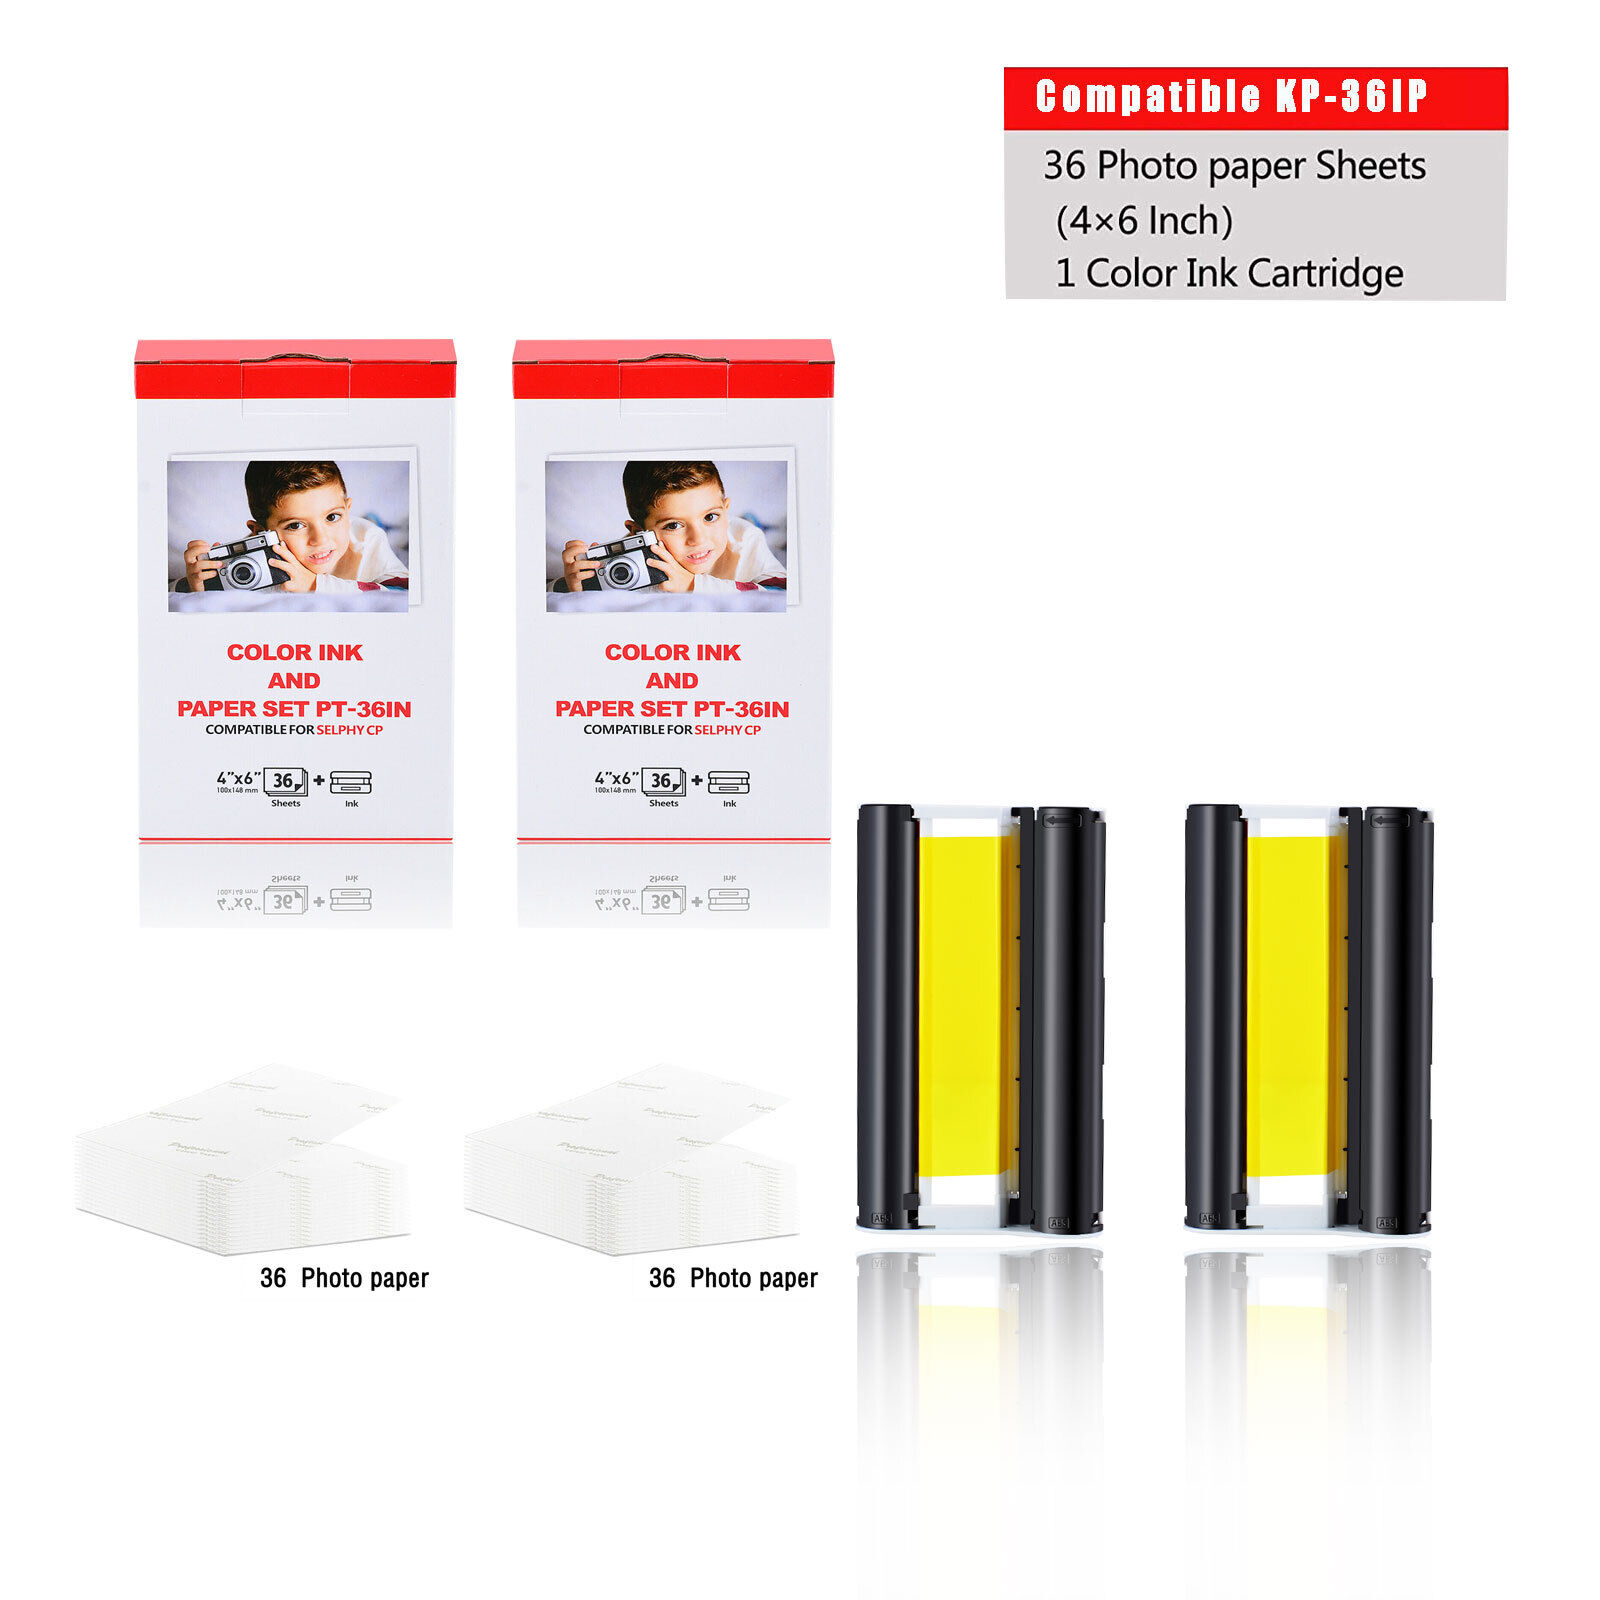 2x Fits Canon KP-36IP Selphy CP-330/400 Color Ink 7737A001 36 4x6 in Photo Paper